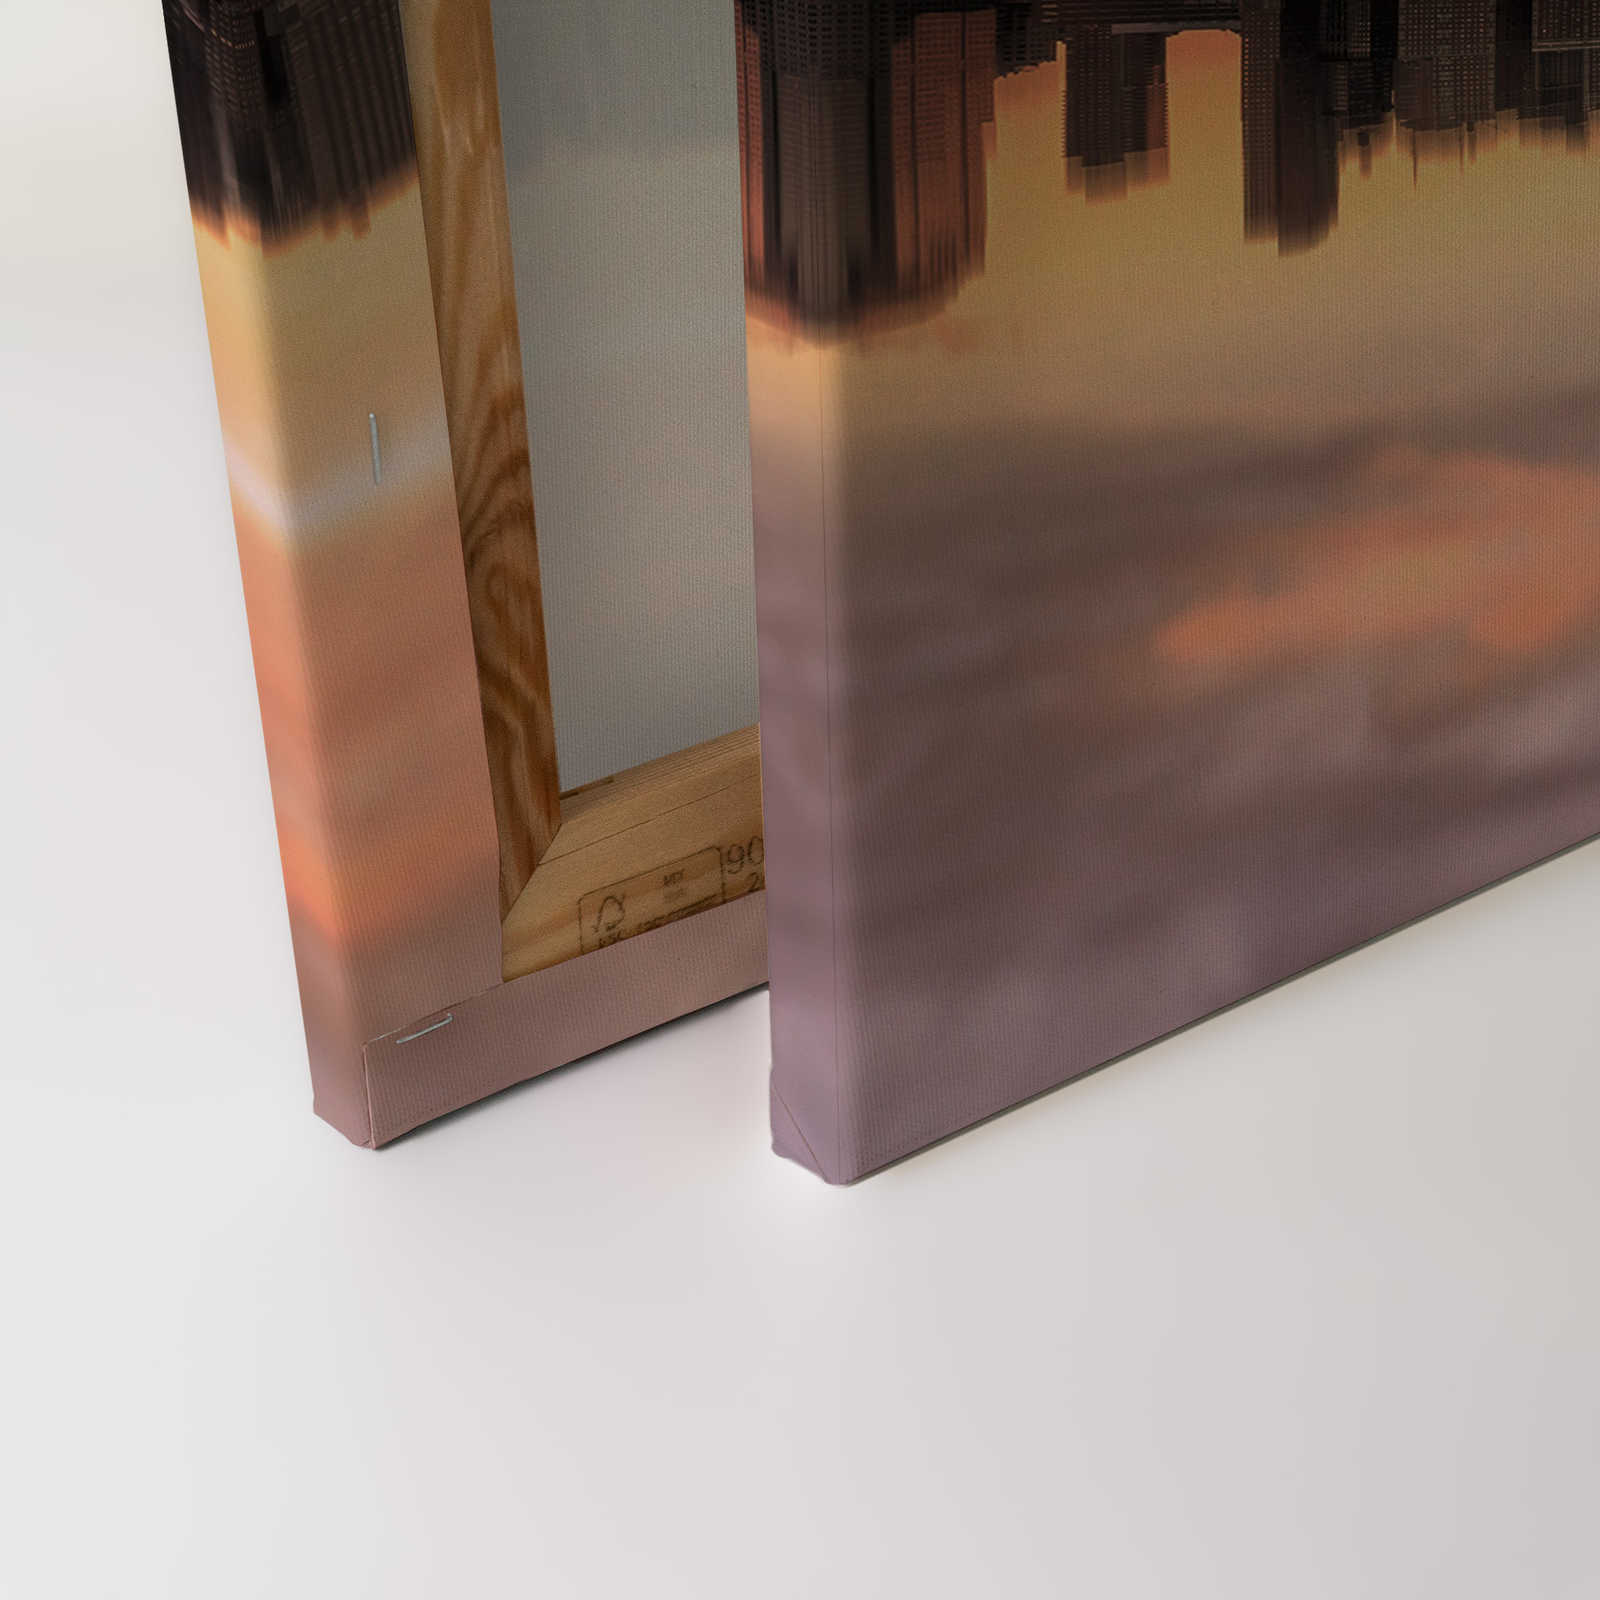             Canvas New York Skyline in the Evening - 0.90 m x 0.60 m
        